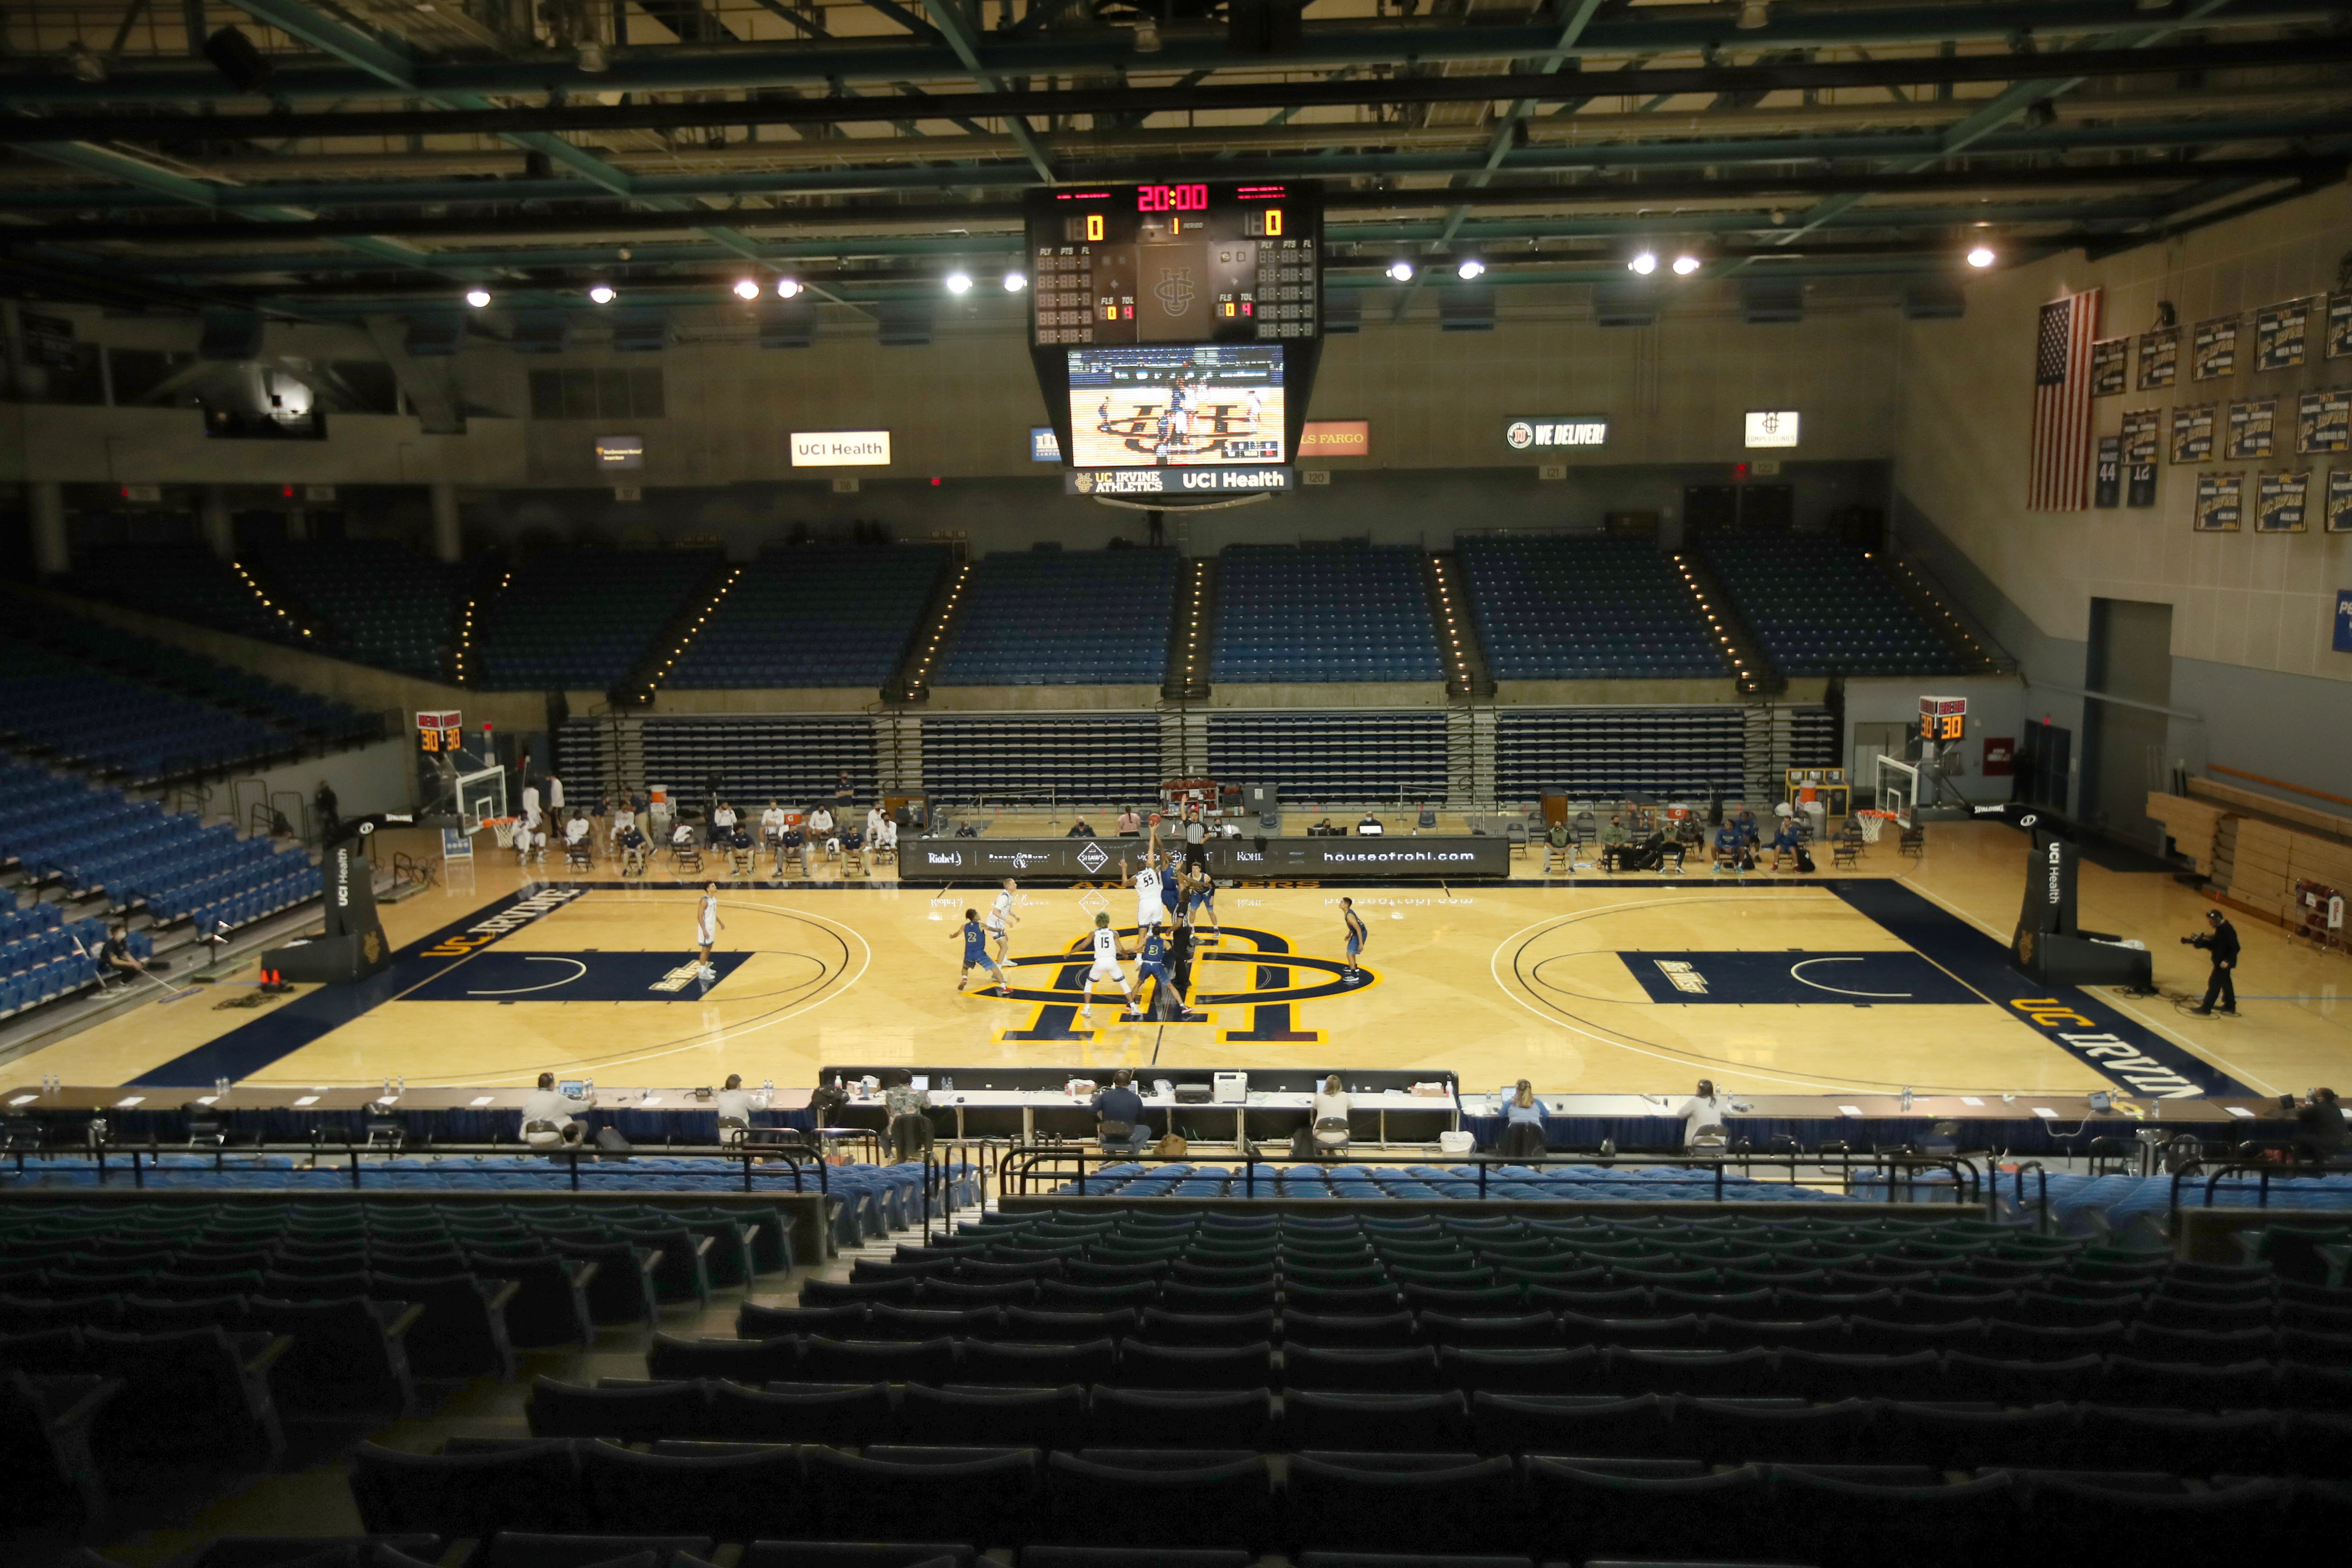 UCI basketball team playing in UCI's Bren Events Center